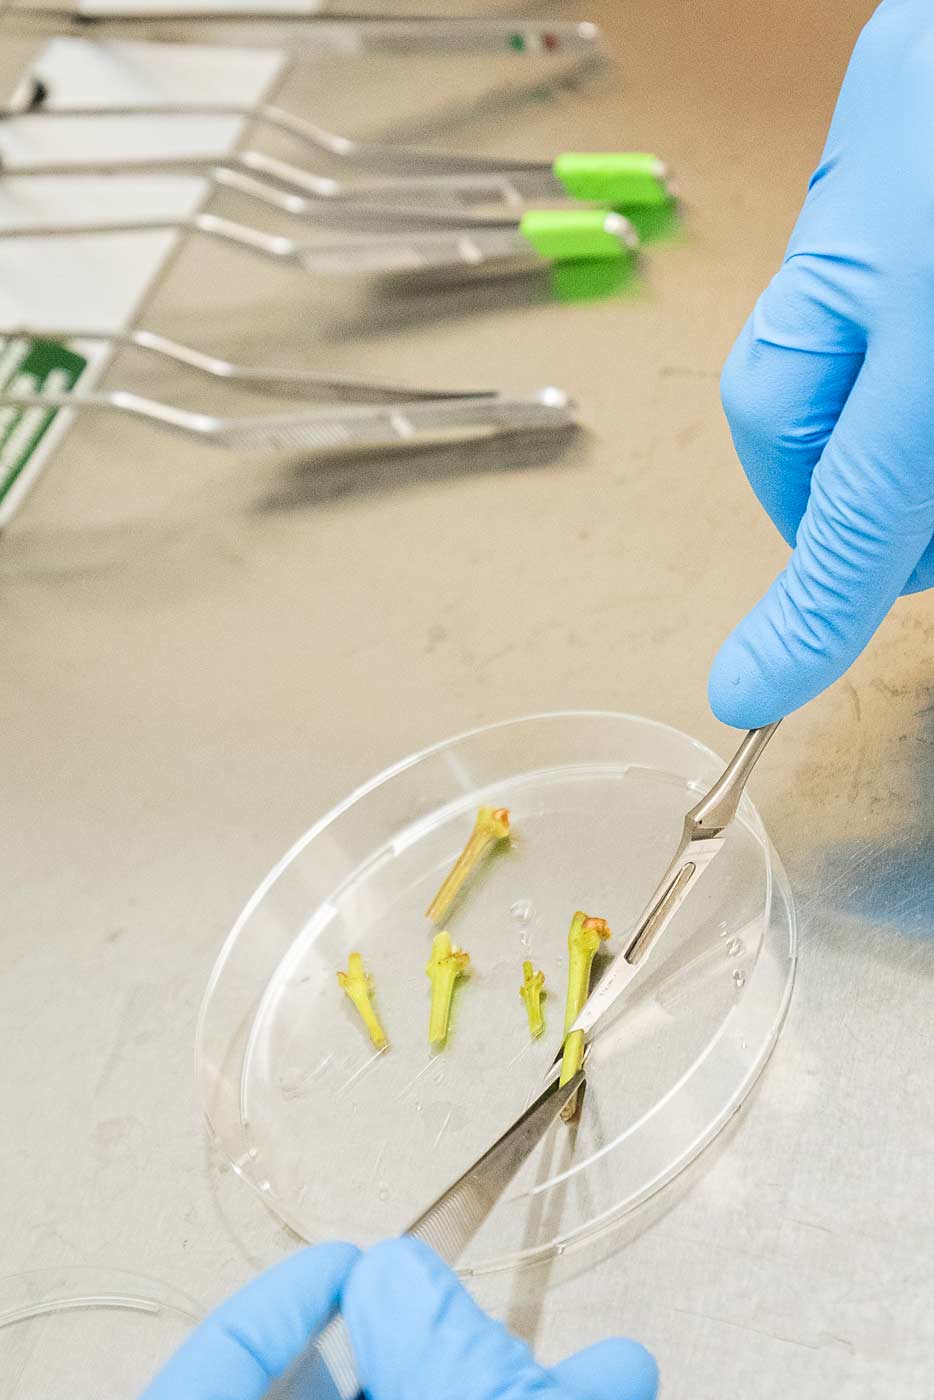 Martin Joseph, a lab technician at the Clean Plant Center Northwest, cuts grape samples during the first stage of the virus elimination process.<b> (TJ Mullinax/Good Fruit Grower)</b>